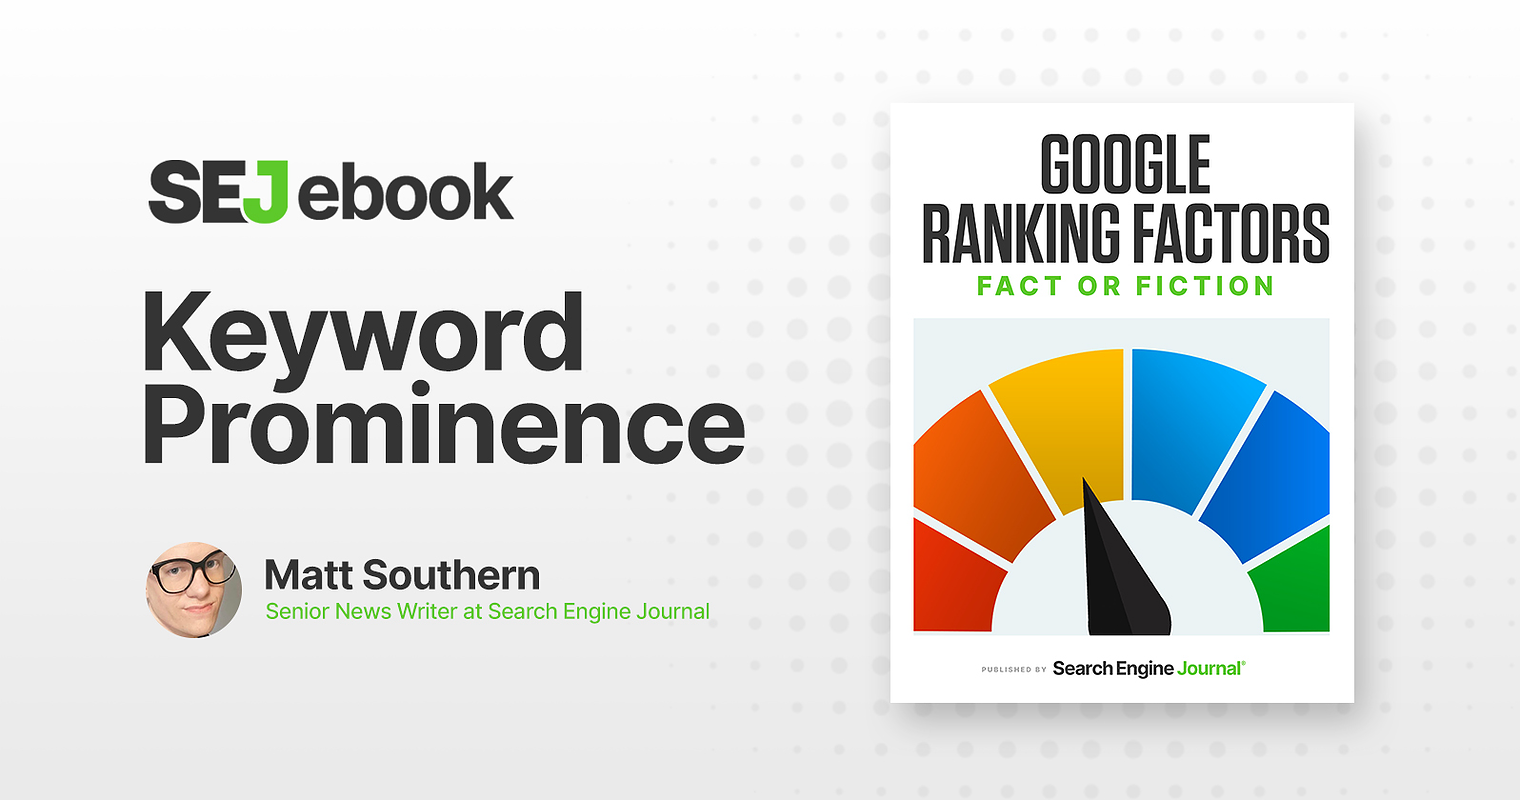 Keyword Prominence As A Google Ranking Factor: What You Need To Know